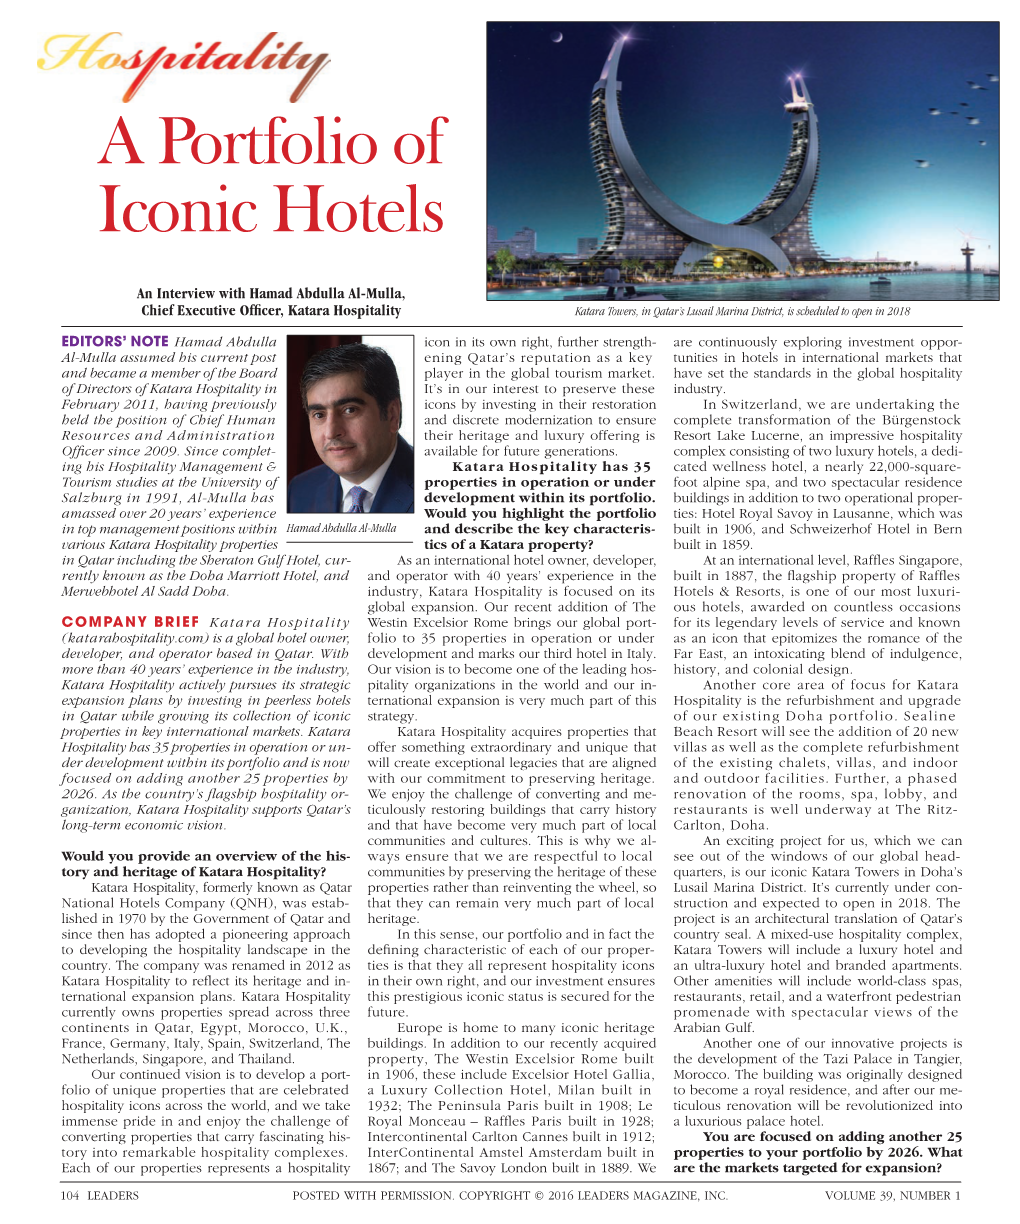 To Download a PDF of an Interview with Hamad